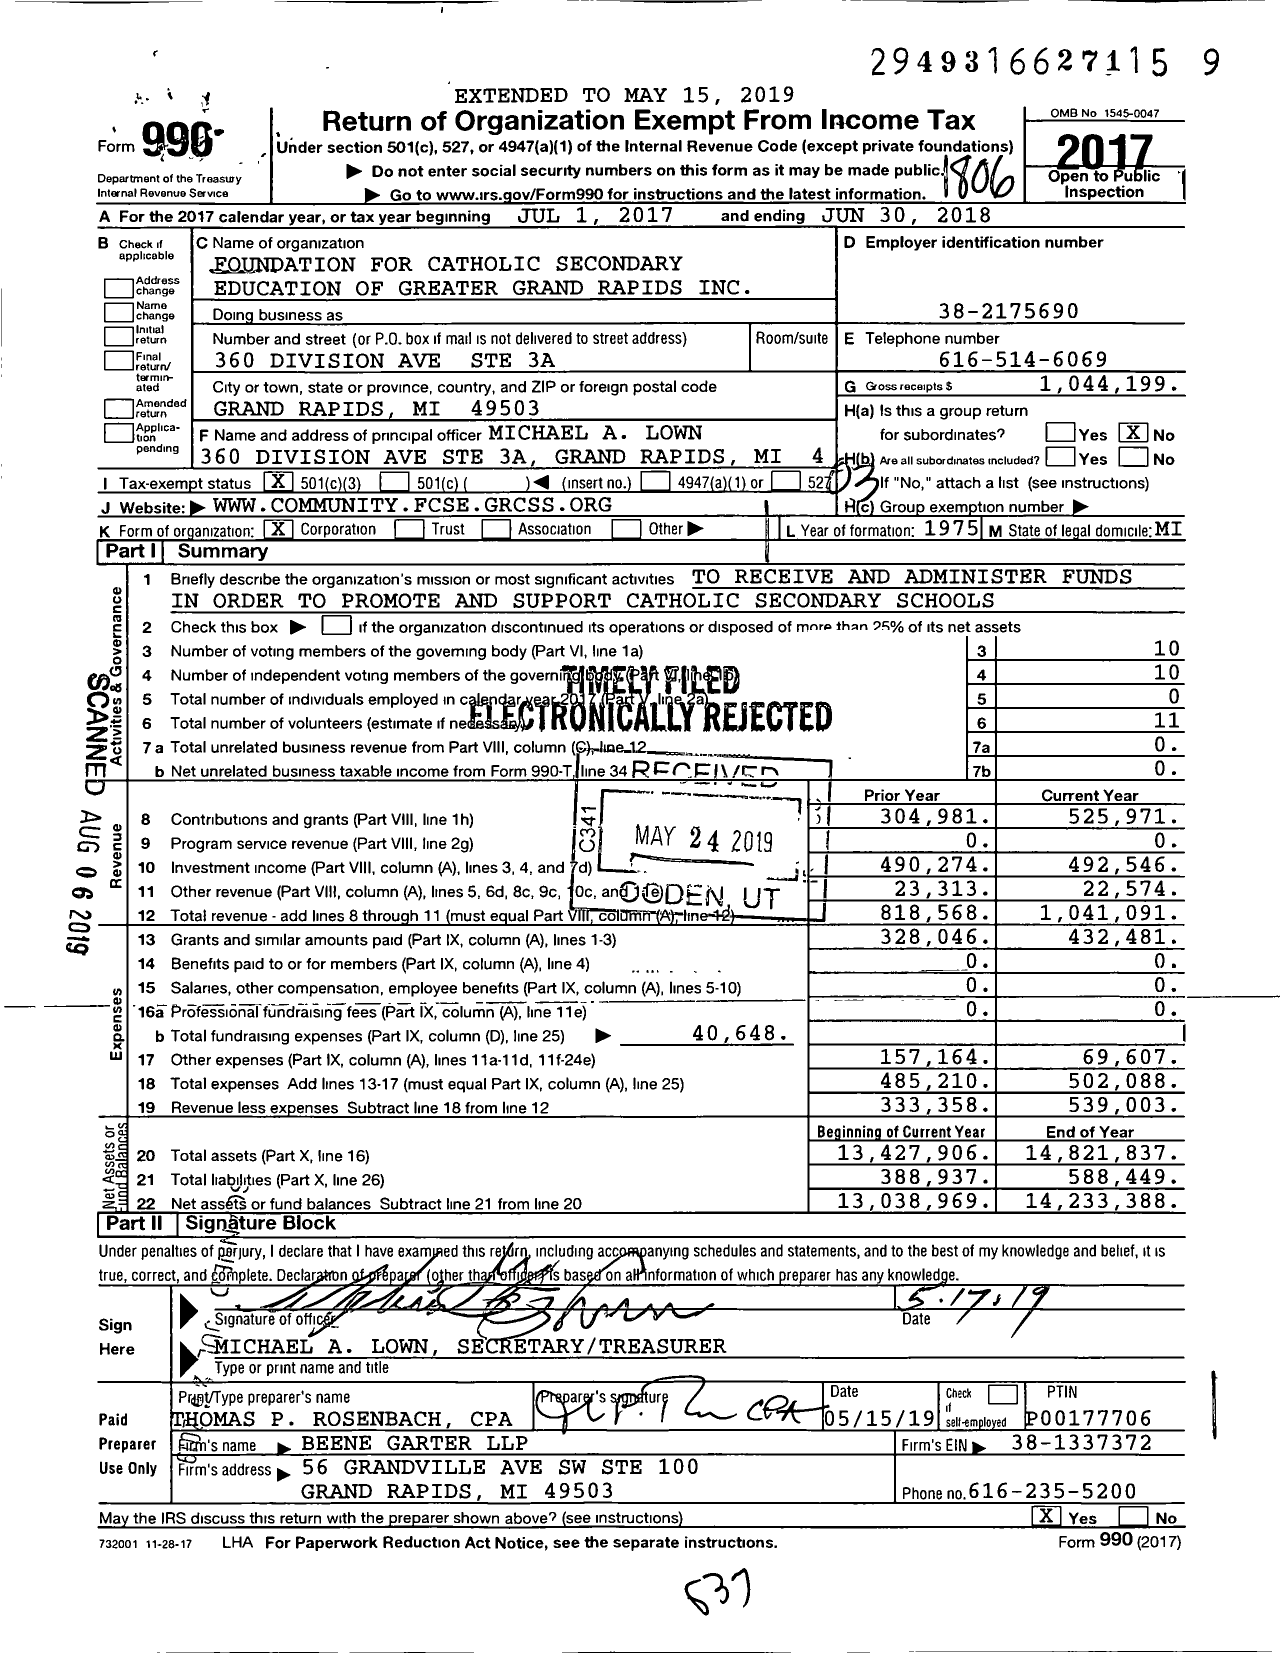 Image of first page of 2017 Form 990 for Foundation for Catholic Secondary Education of Greater Grand Rapids